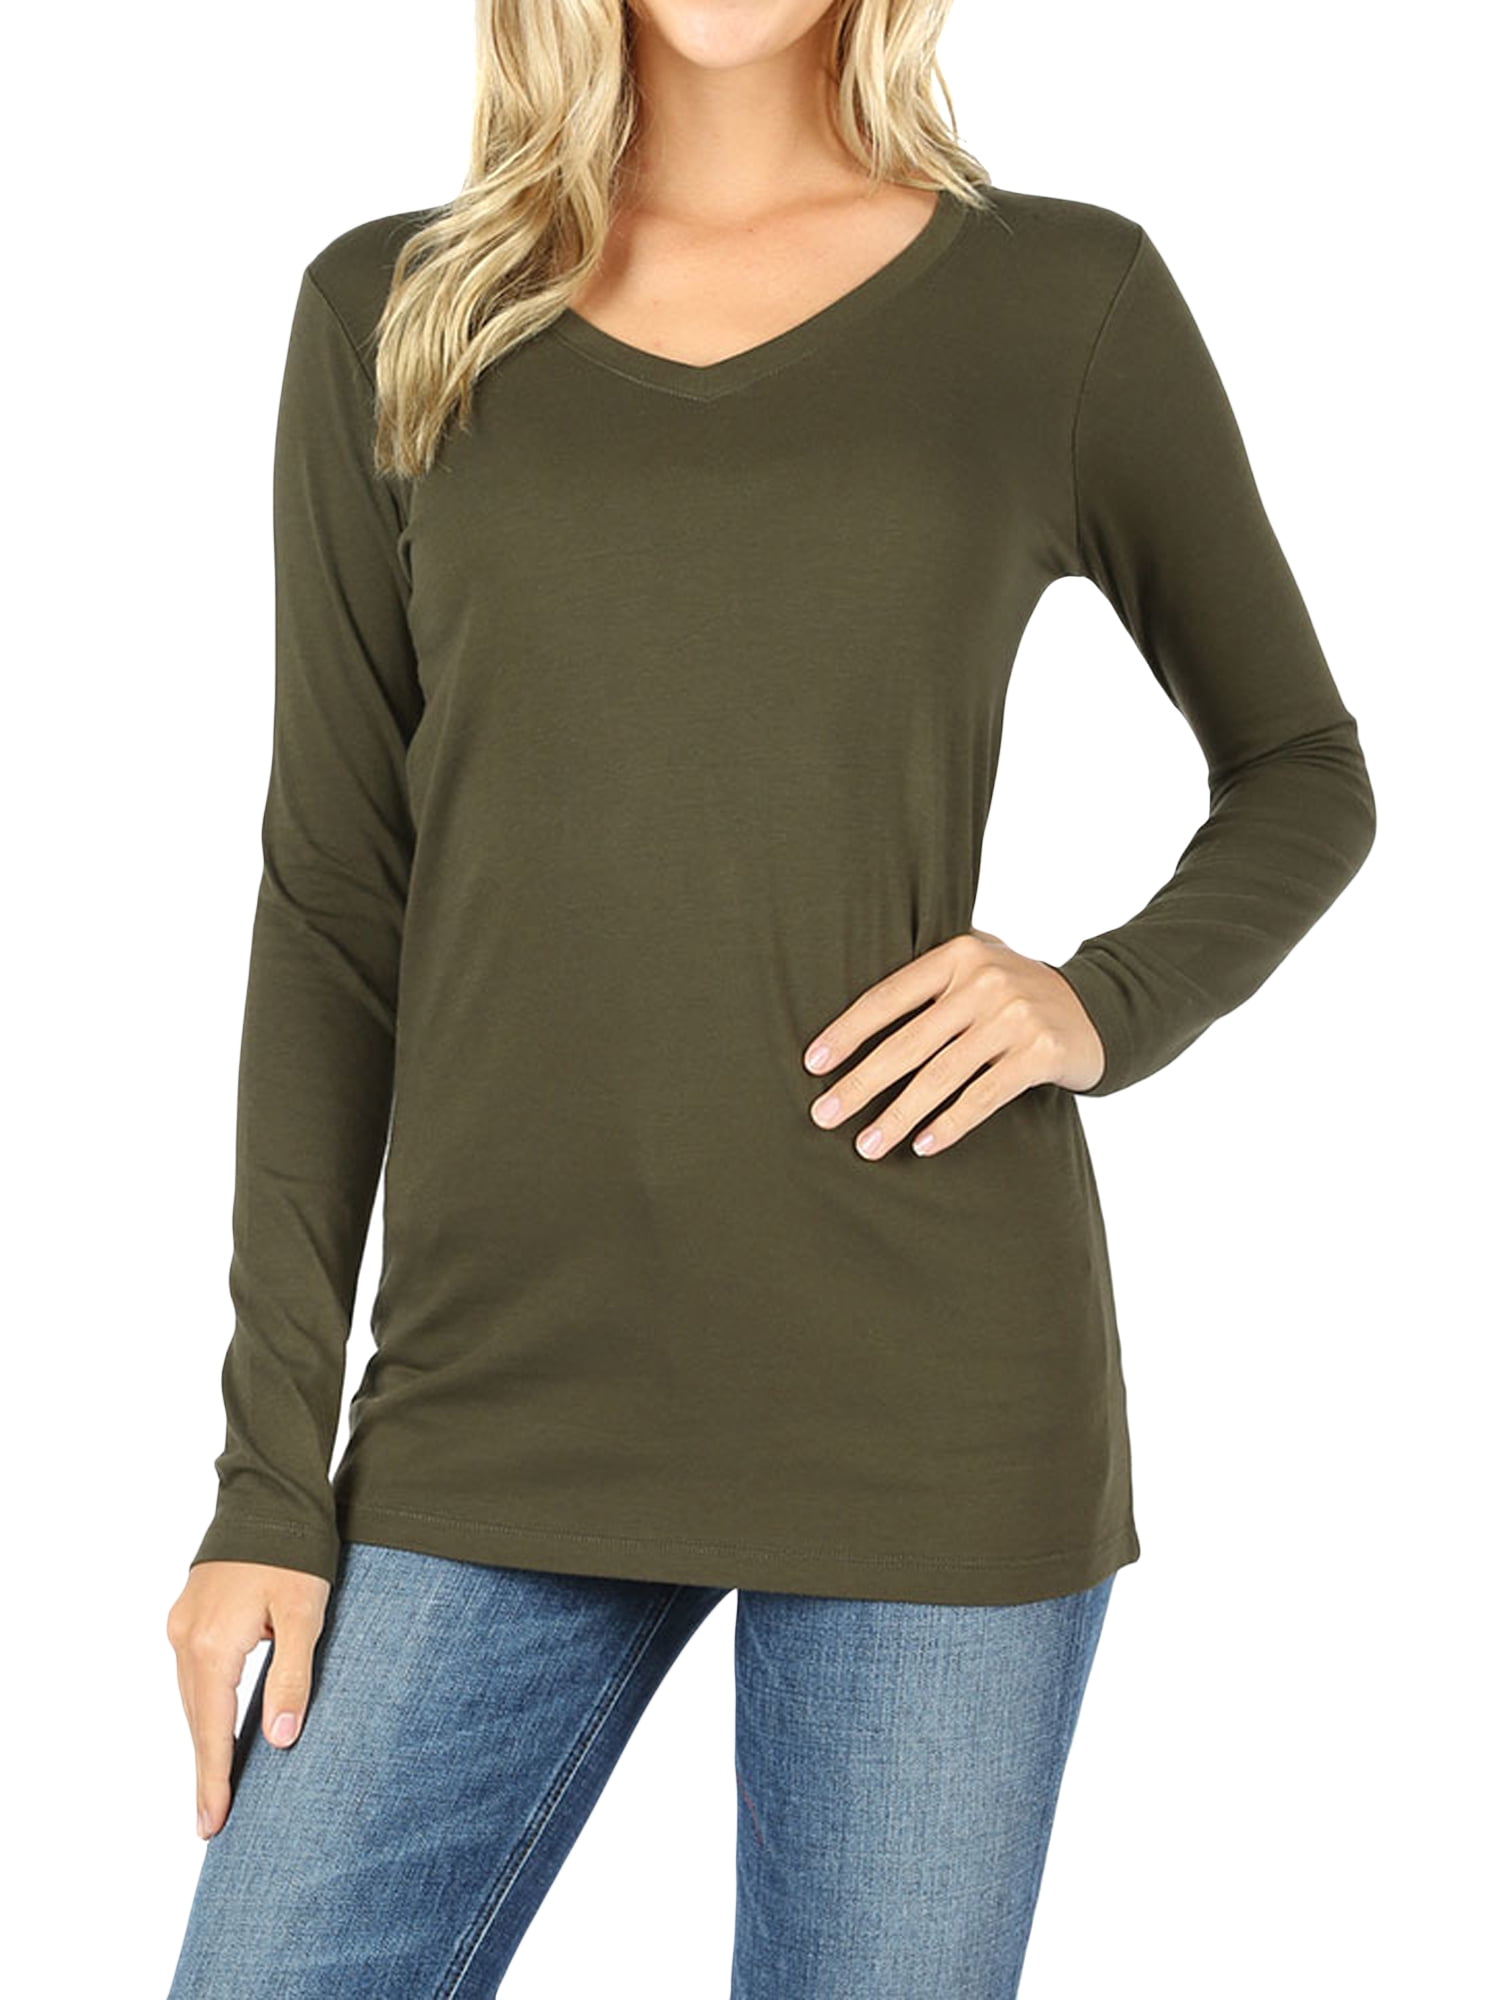 TheLovely - Women Casual Basic Cotton Loose Fit V-Neck Long Sleeve T ...